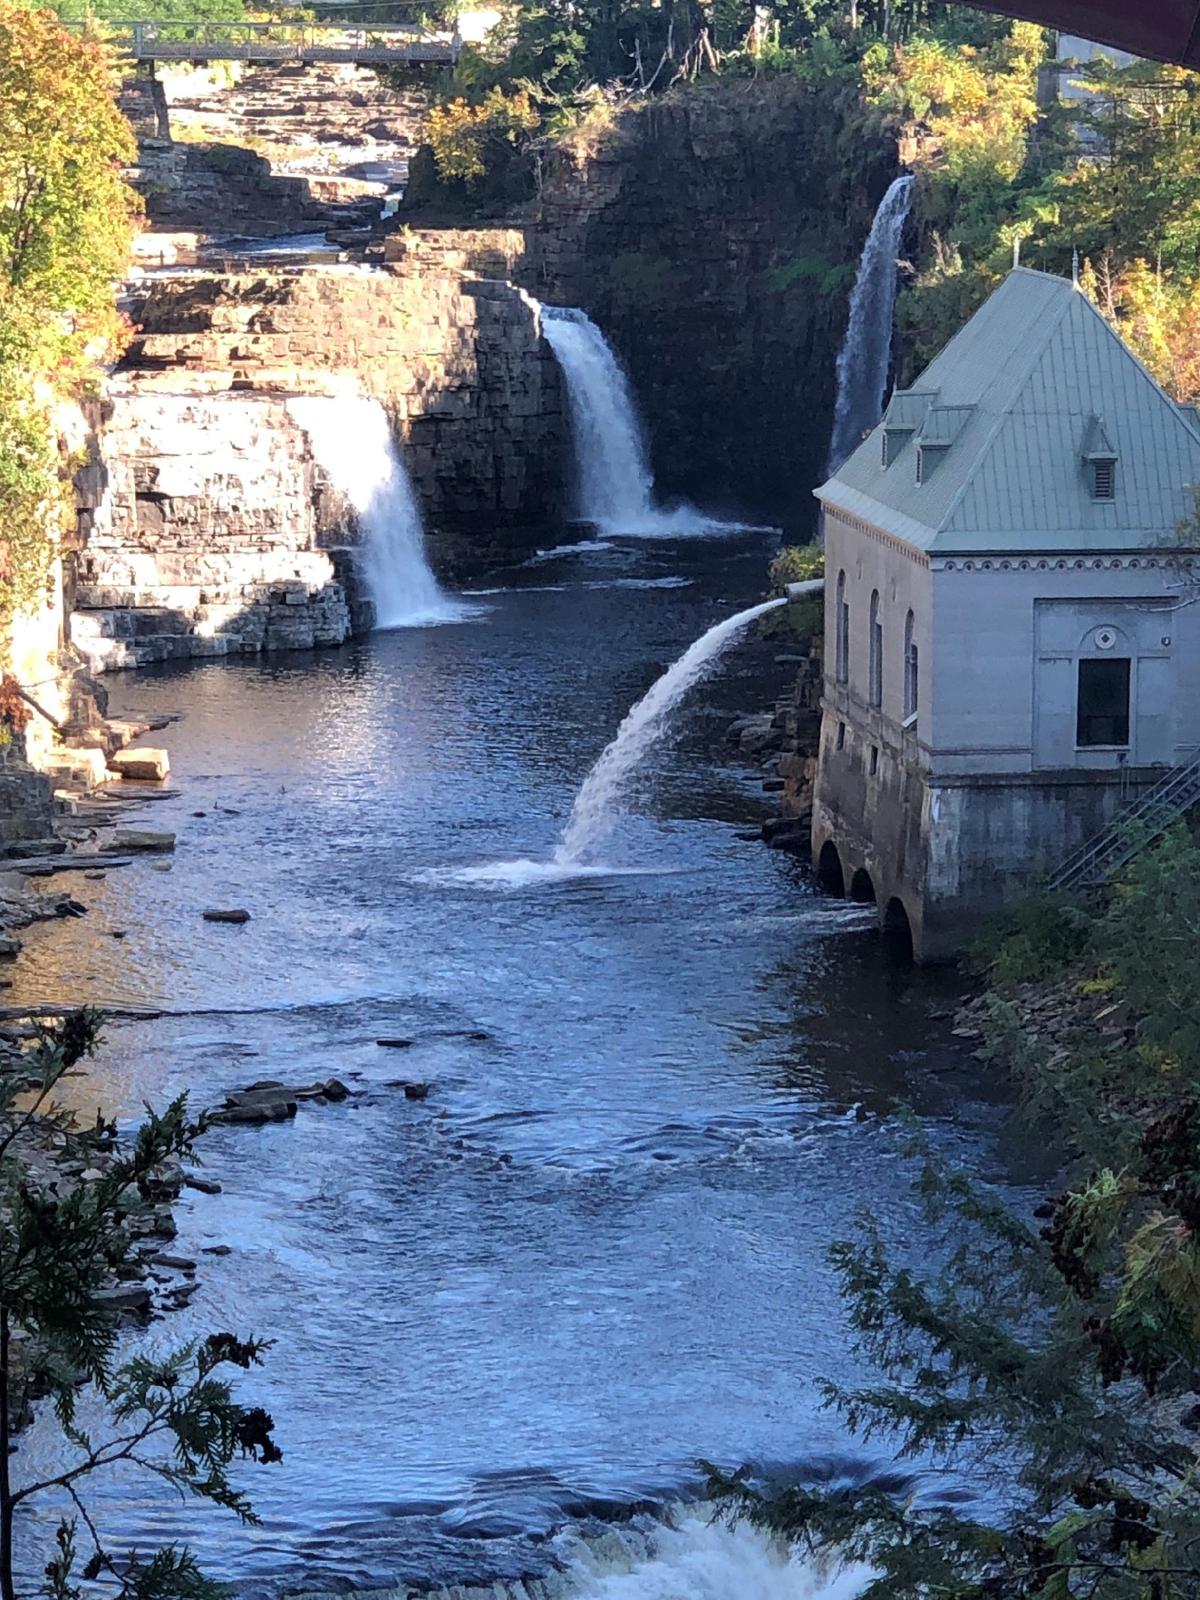 Ausable Chasm, New York, is the home of Ausable Falls and a great place for hiking and water adventures. (Photo courtesy of Bill Neely.)